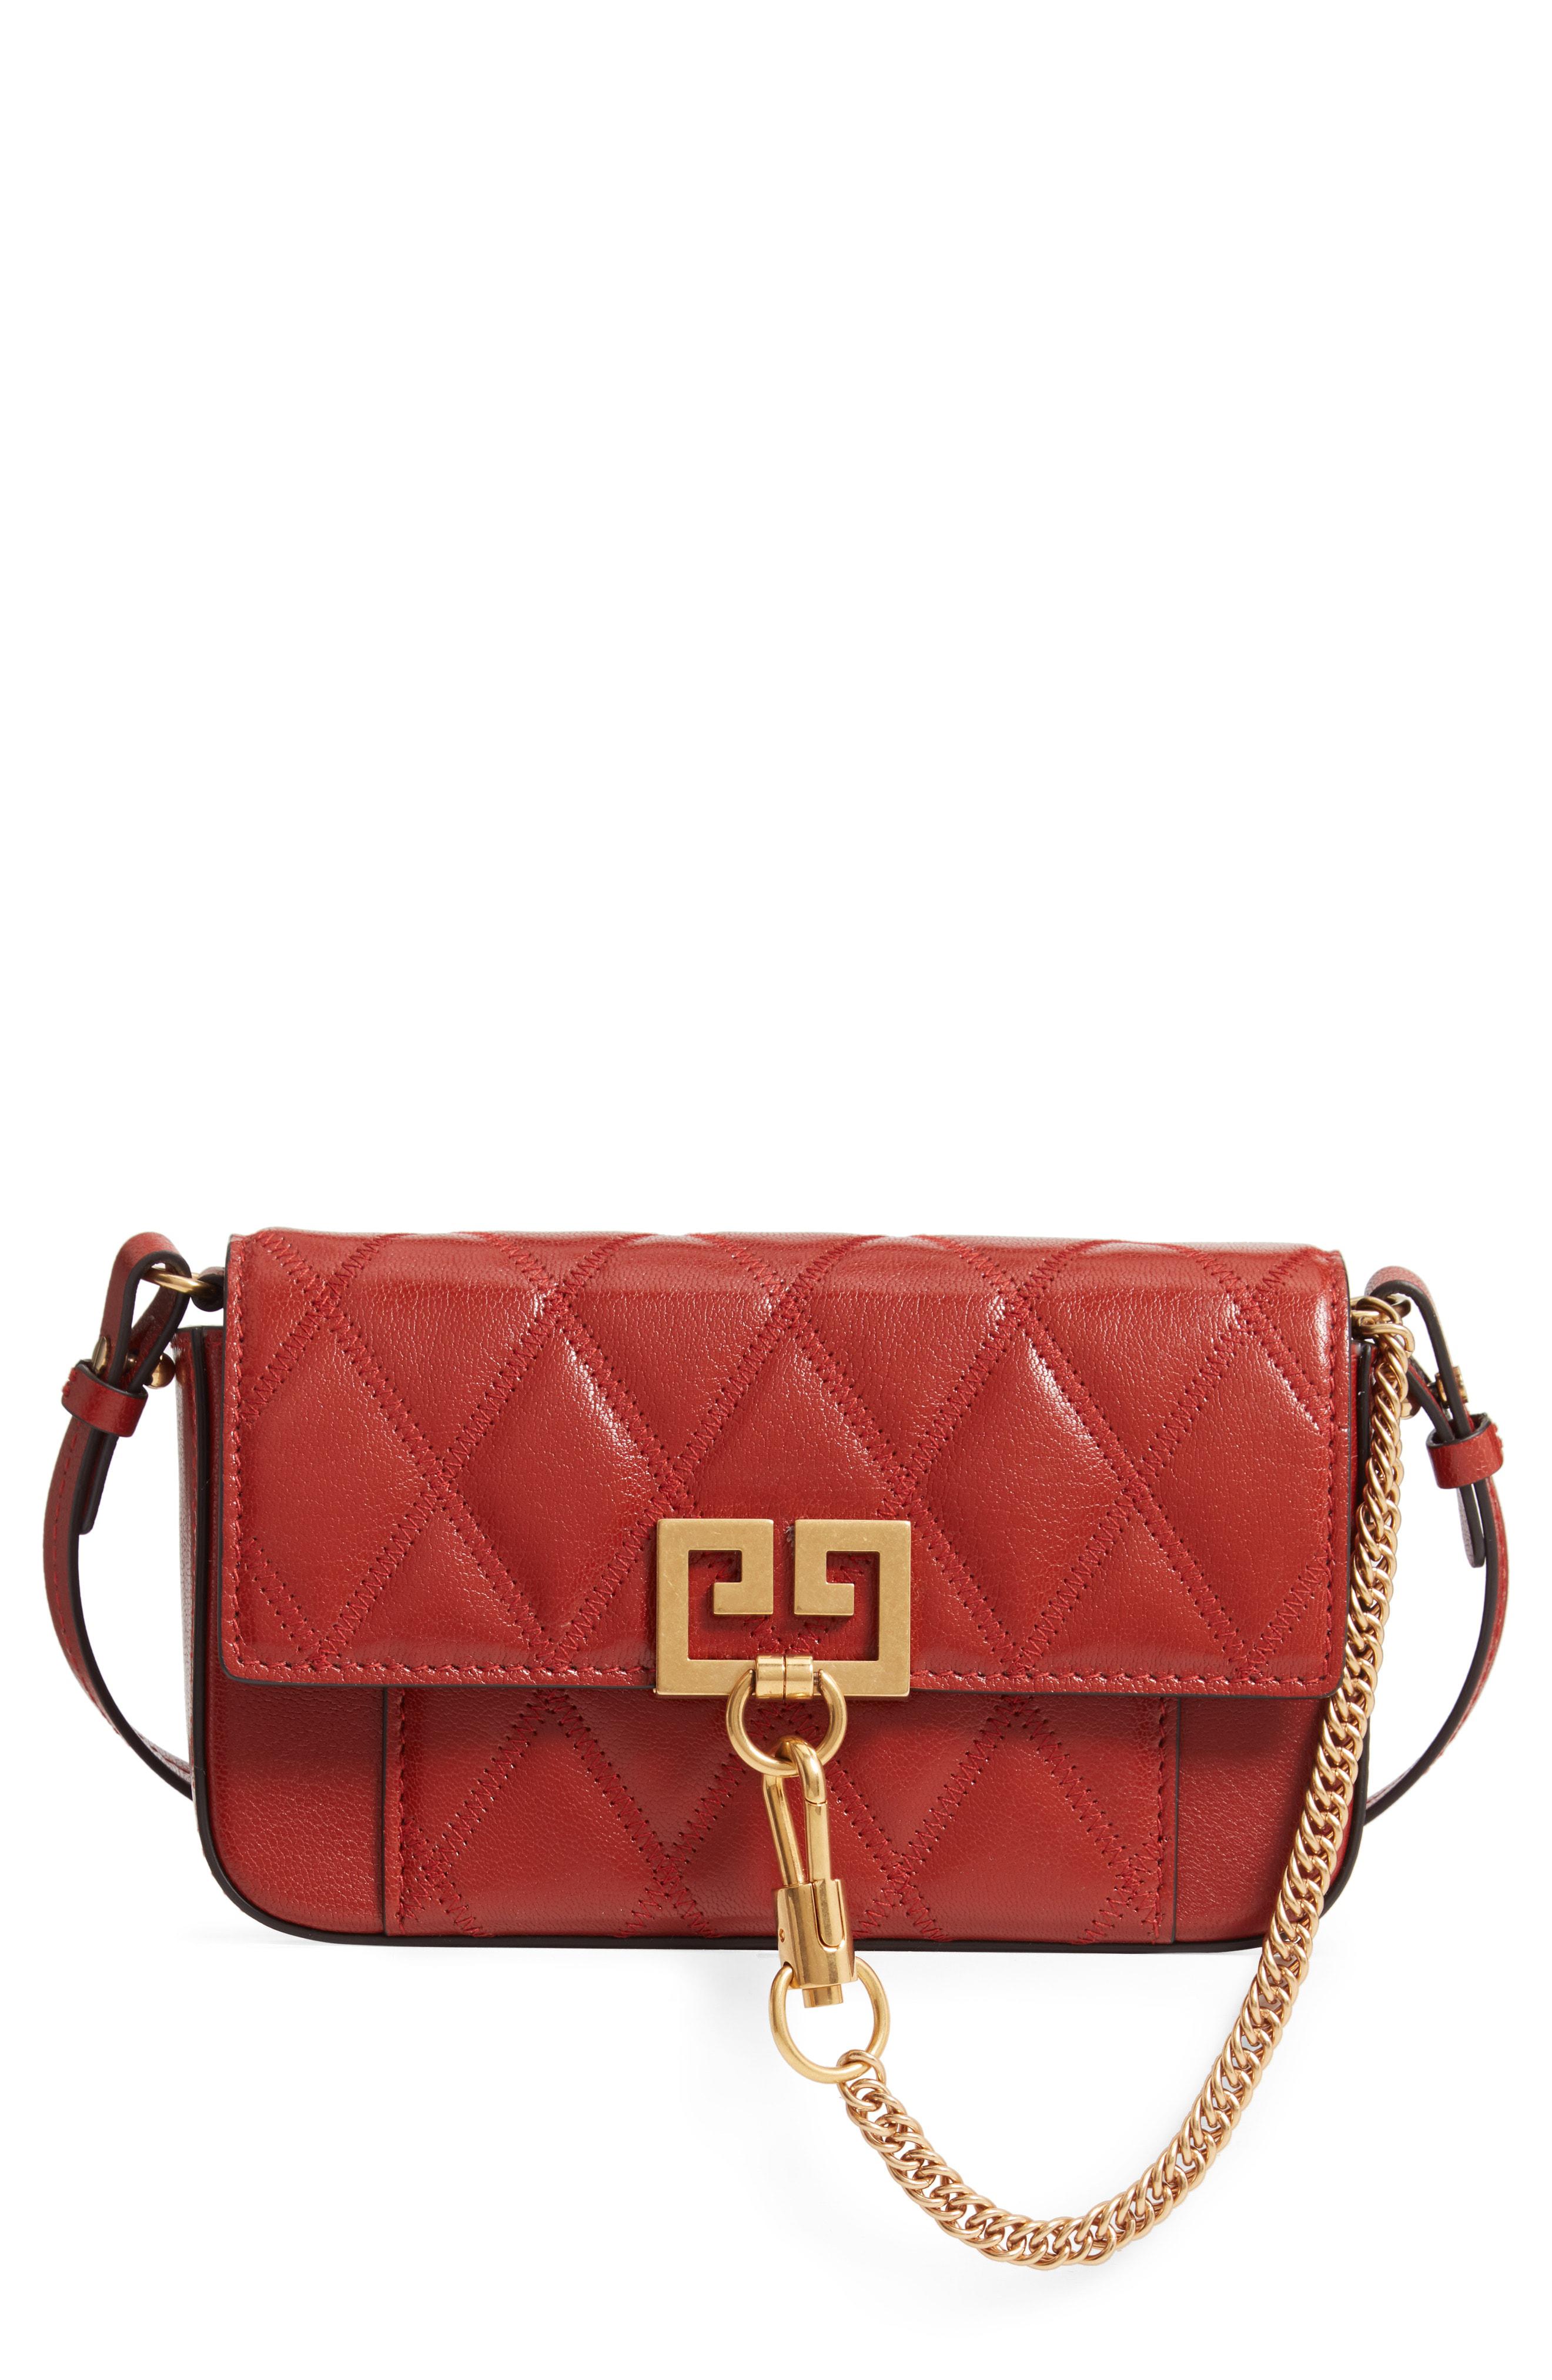 Givenchy Mini Pocket Quilted Convertible Leather Bag - in Red - Lyst